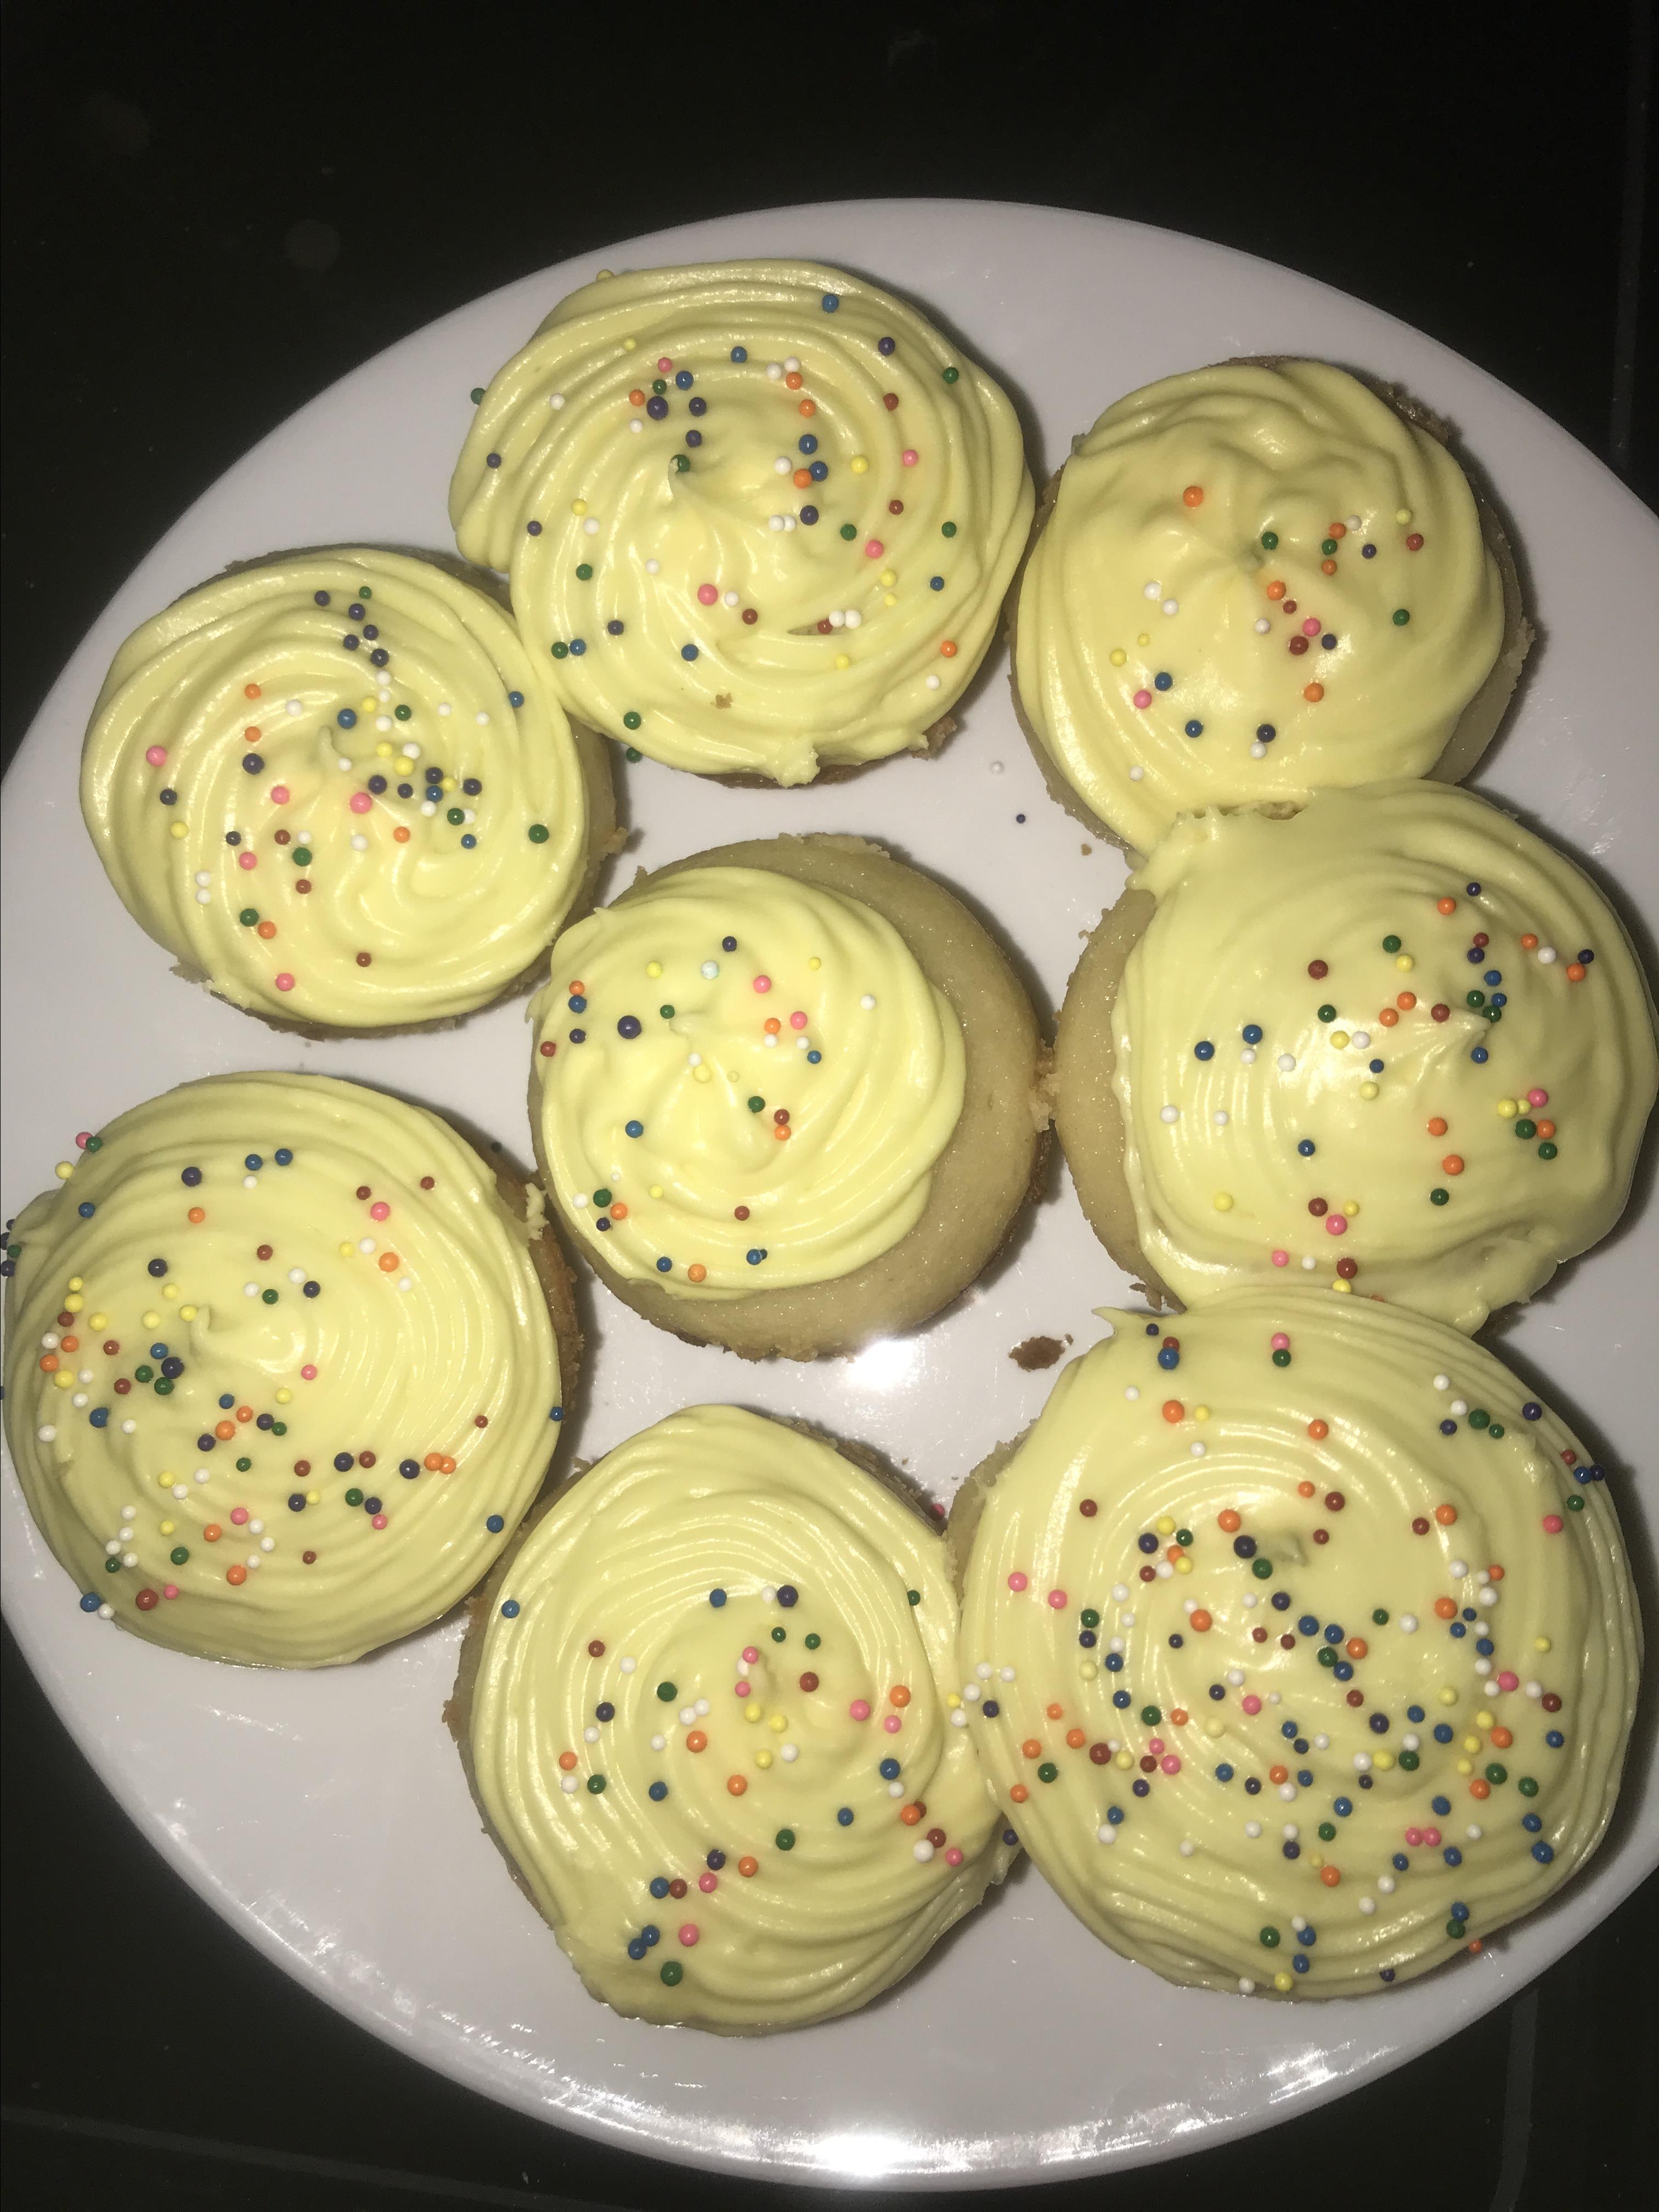 The Best Homemade Cupcakes